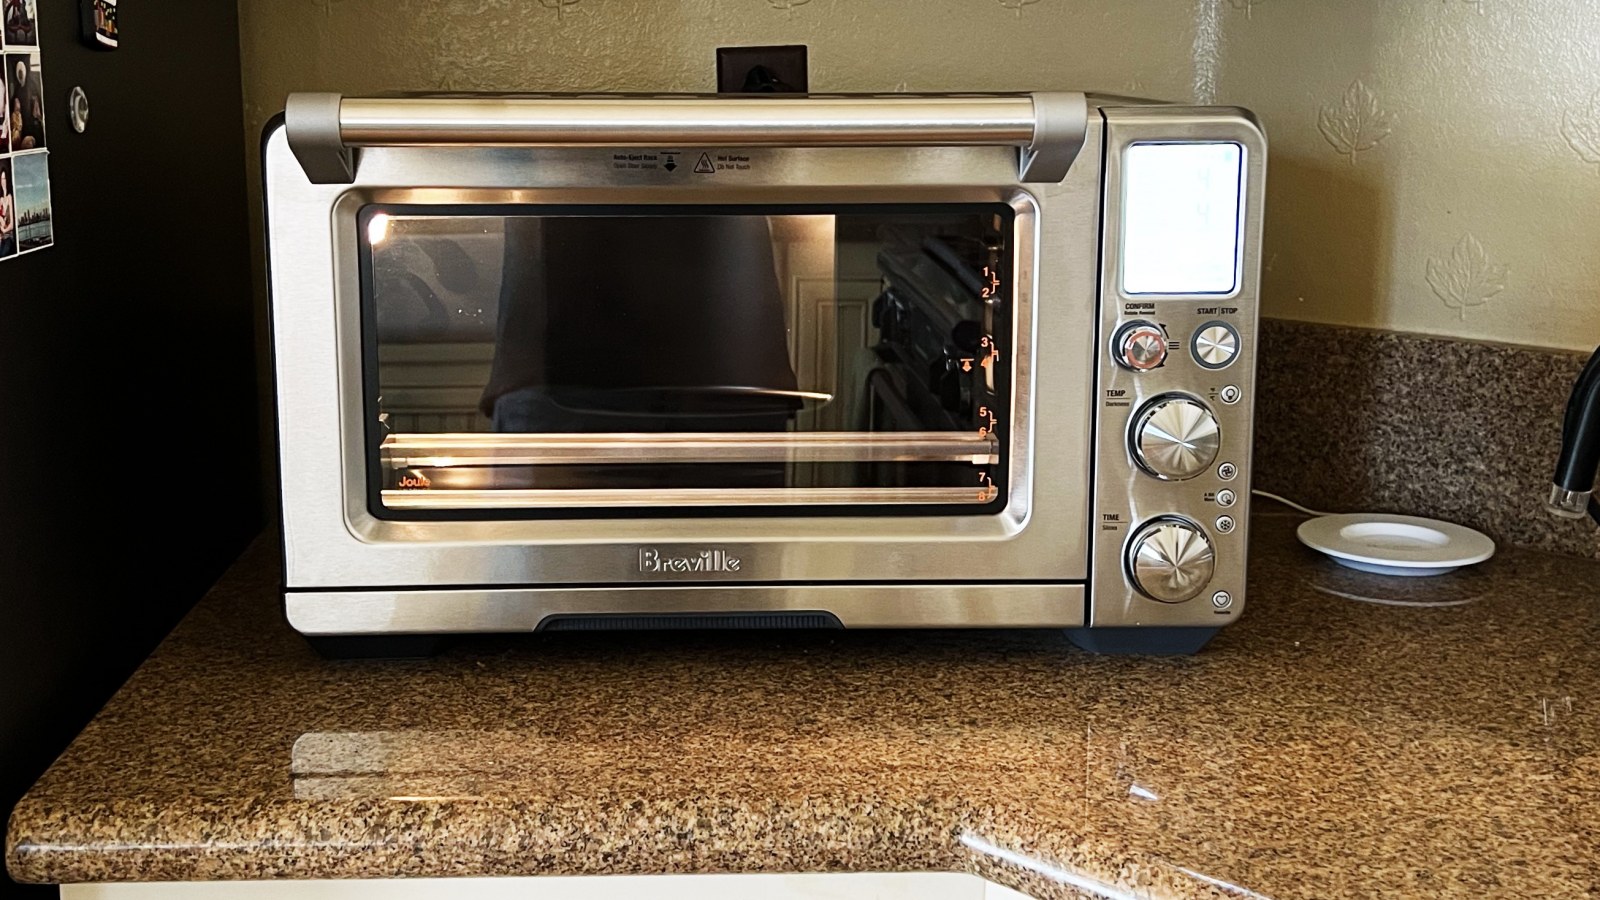 Smart Oven Air Fryer Pro - Convection Oven